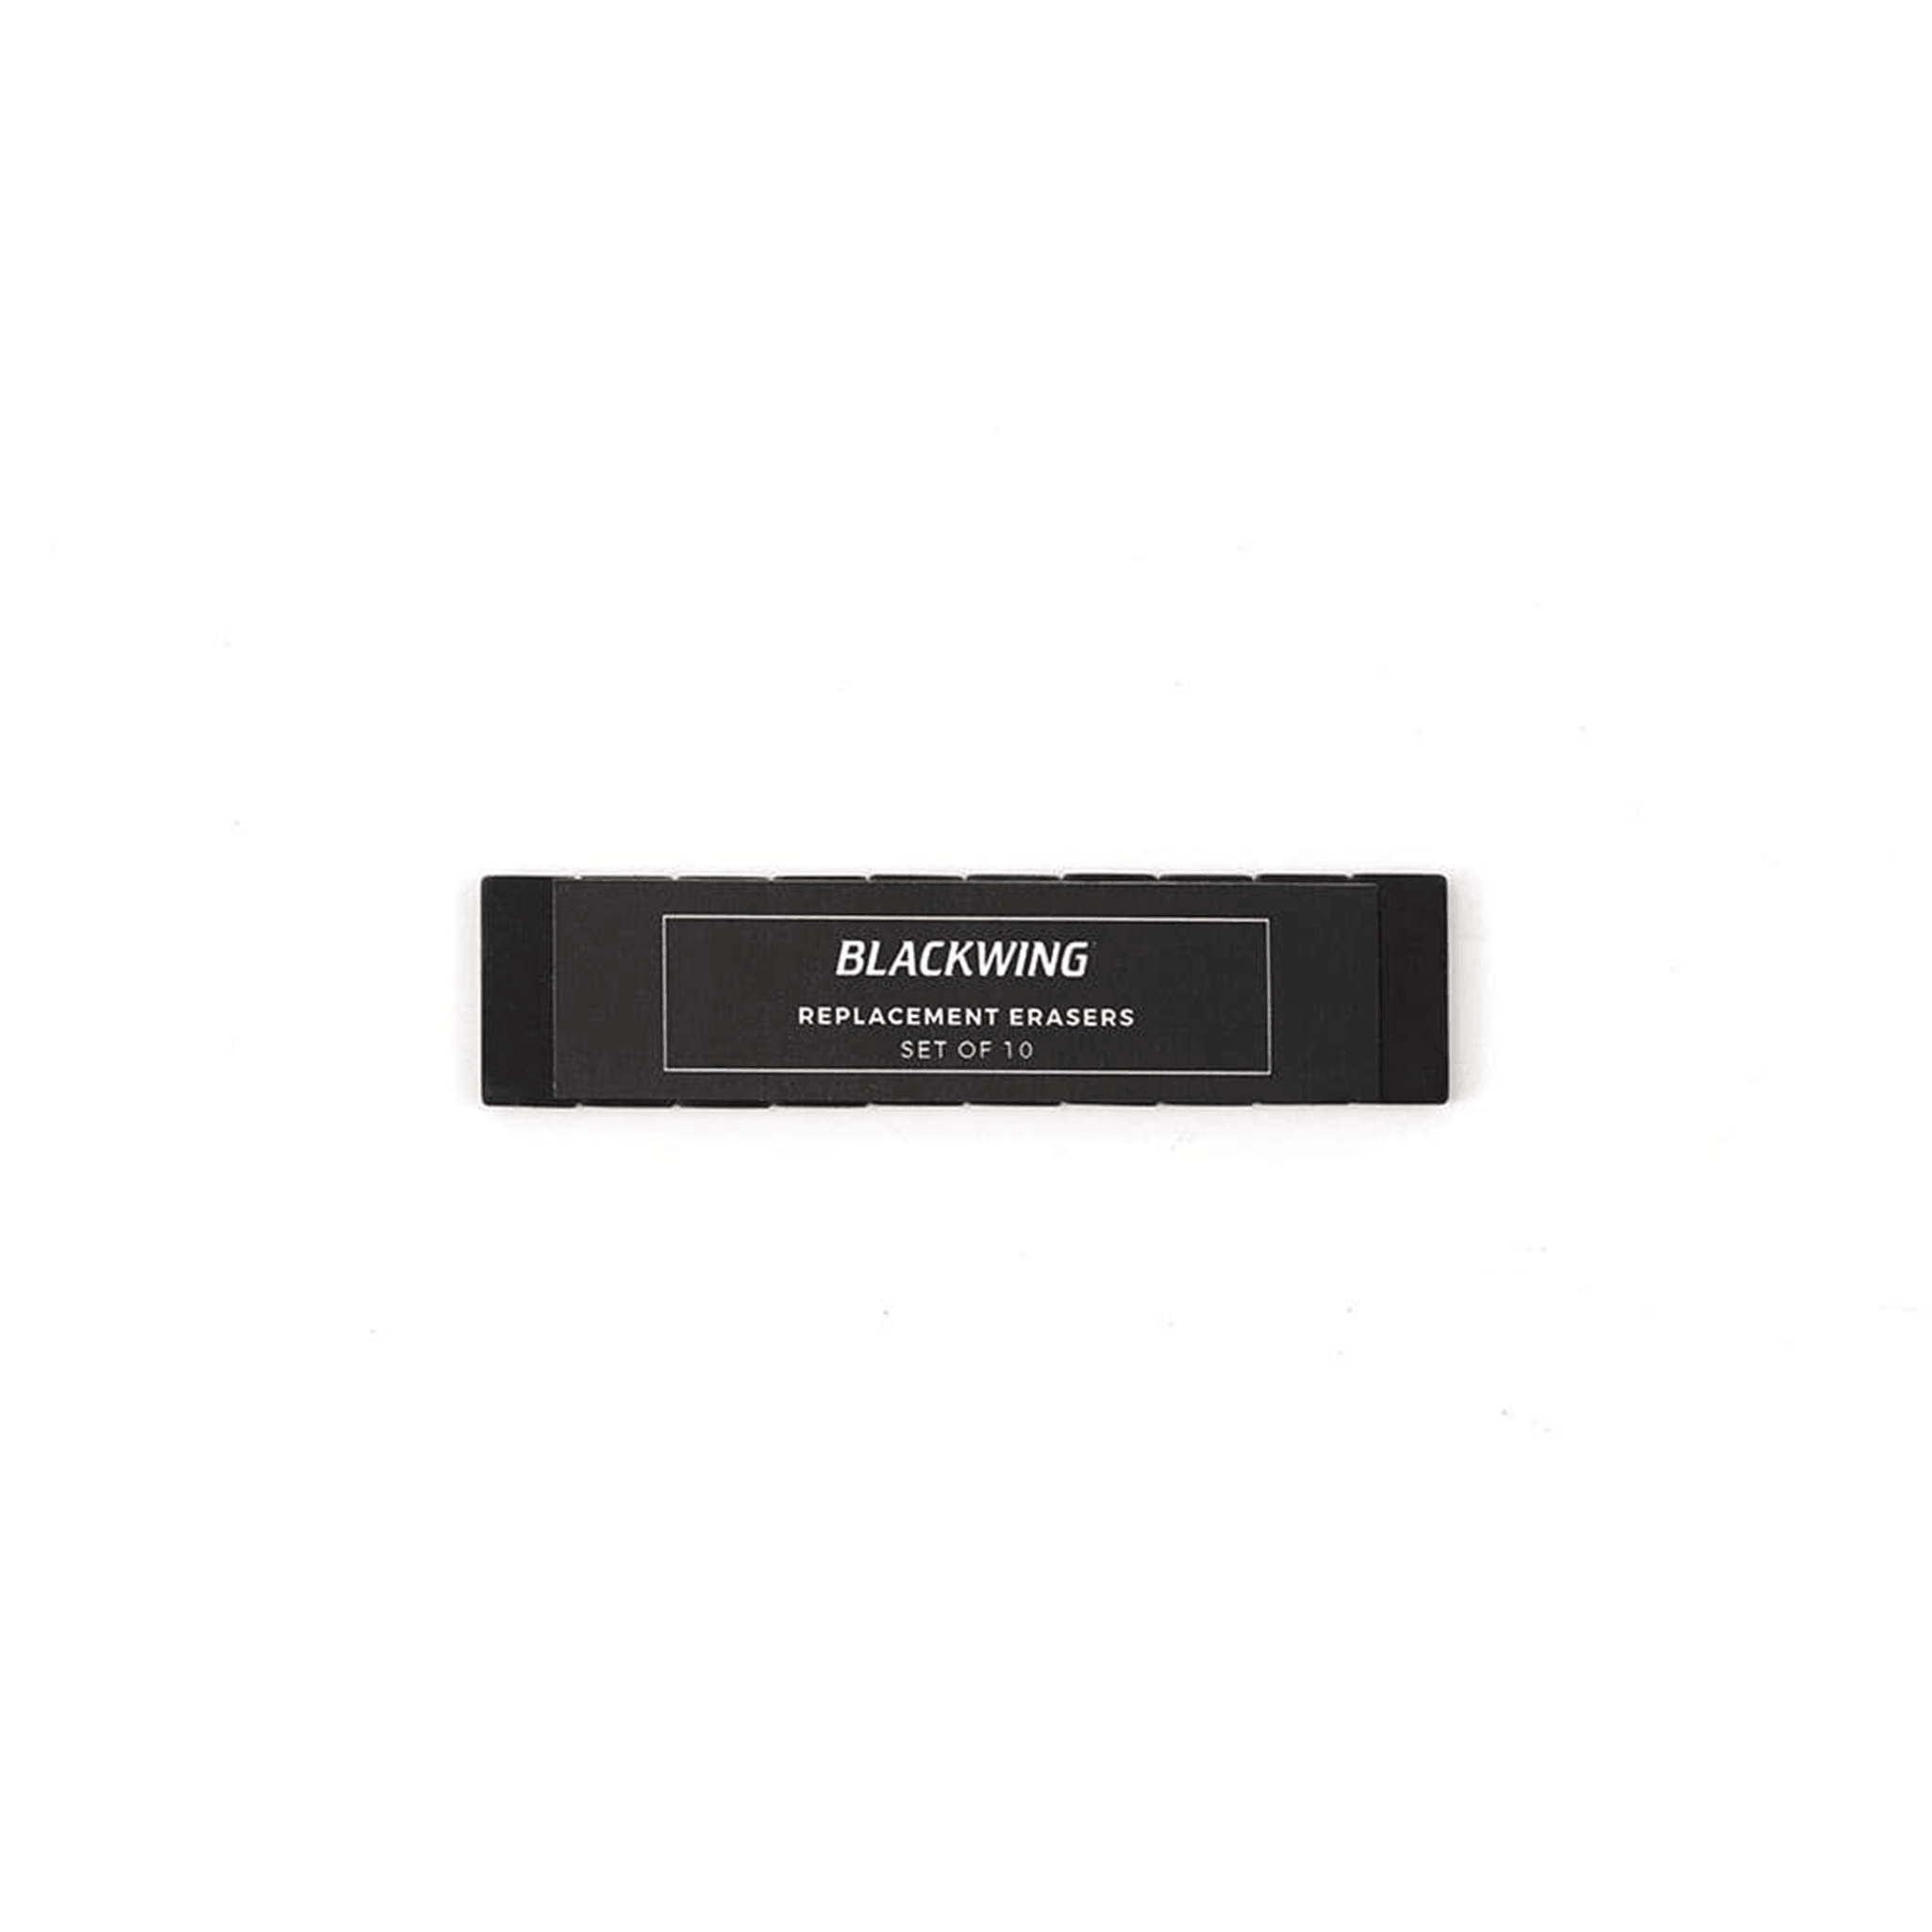 Blackwing Replacement Erasers Black - Laywine's